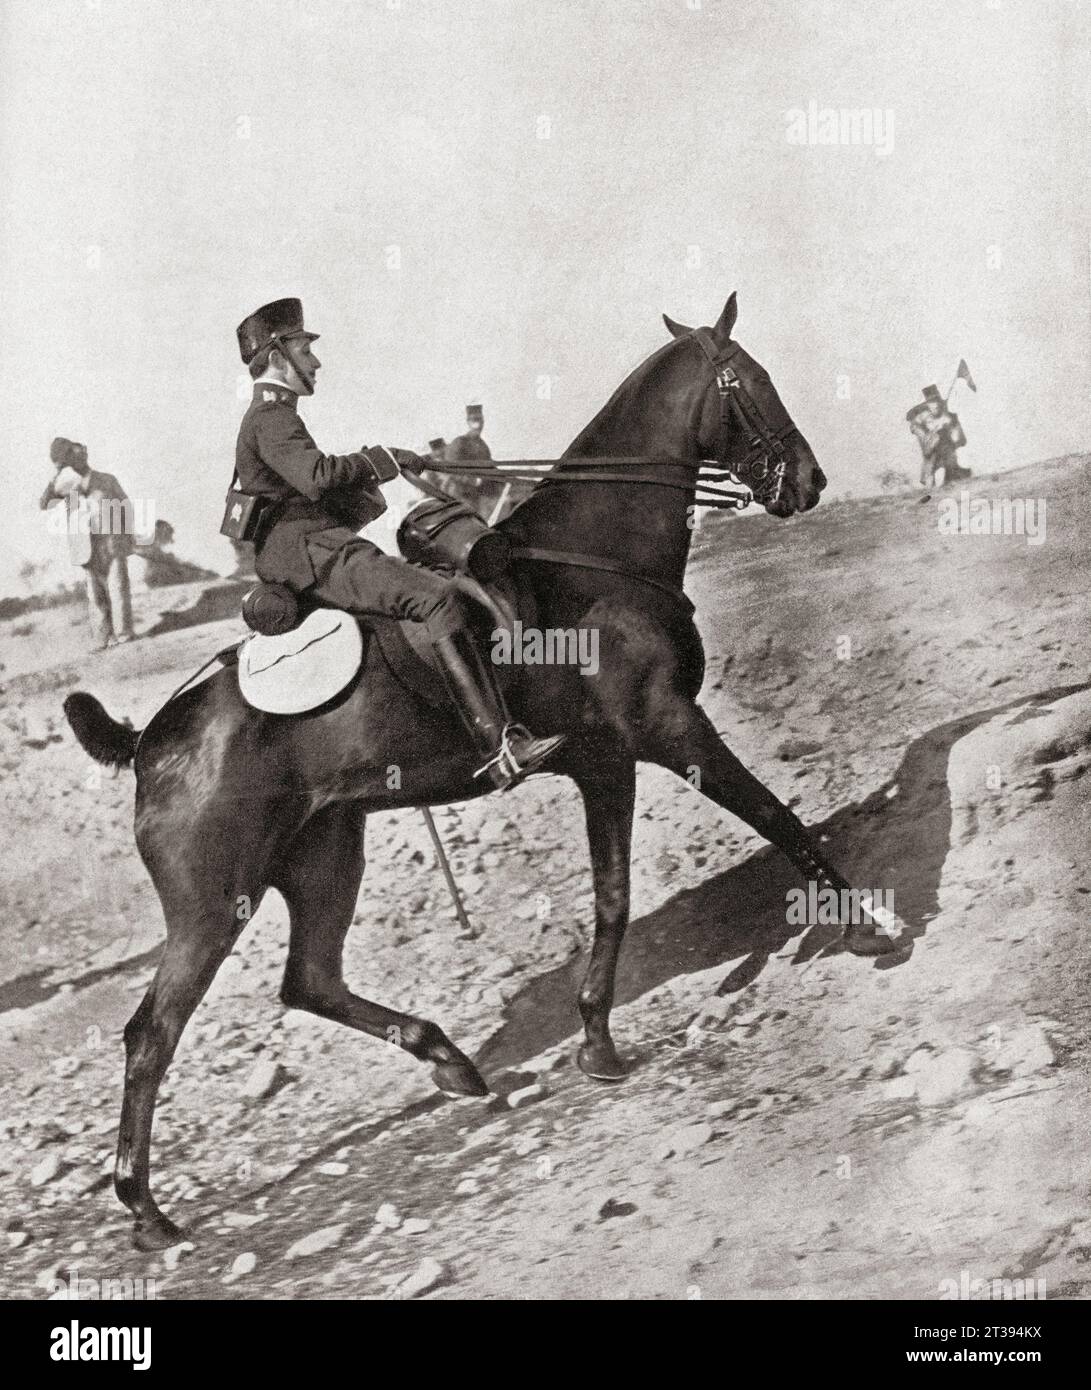 Alfonso XIII touring positions occupied by troops during the manoeuvers carried out in Paracuellos de Jarama, Spain, 1912.  Alfonso XIII, 1886 –  1941, aka El Africano or the African. King of Spain.  From Mundo Grafico, published 1912. Stock Photo